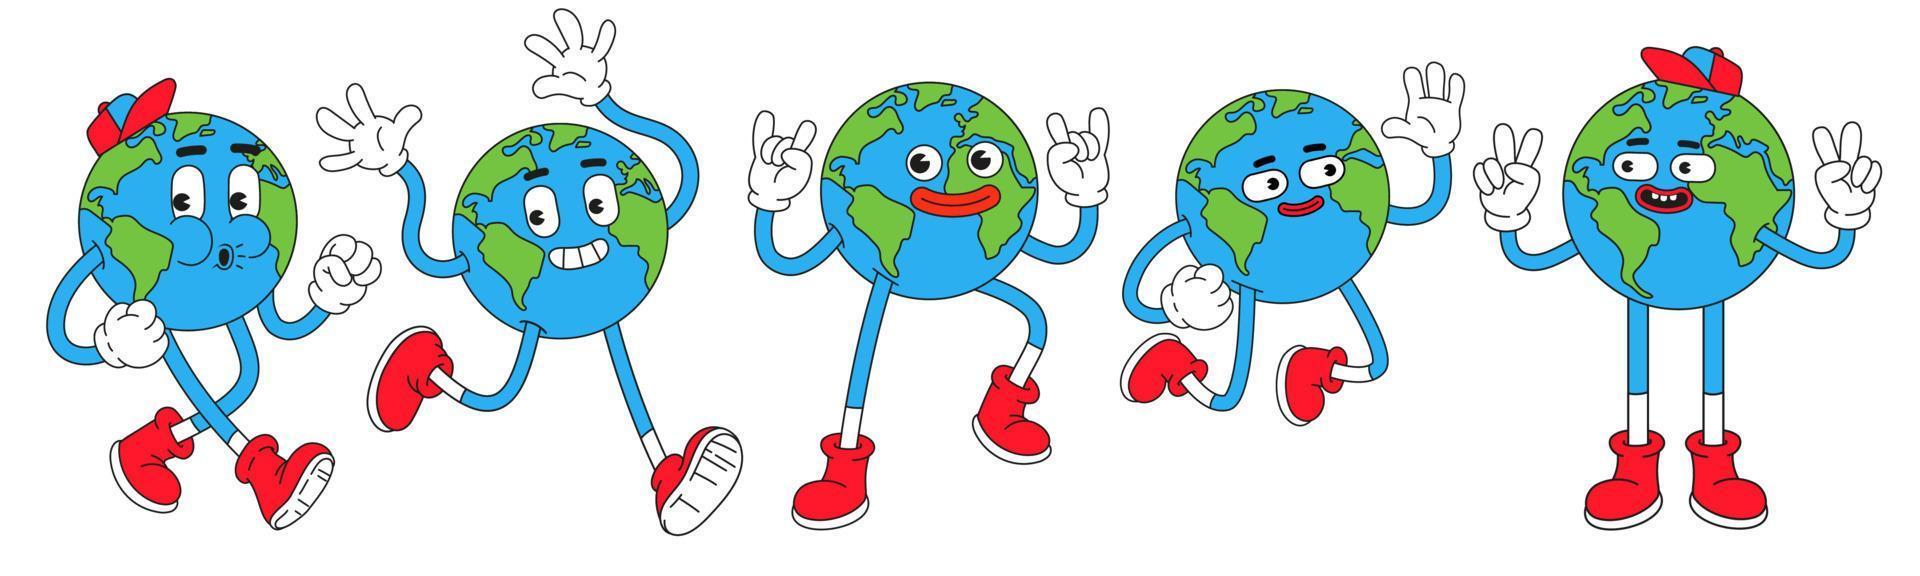 Earth characters in trendy retro cartoon style. Funny globe with smiley face. vector